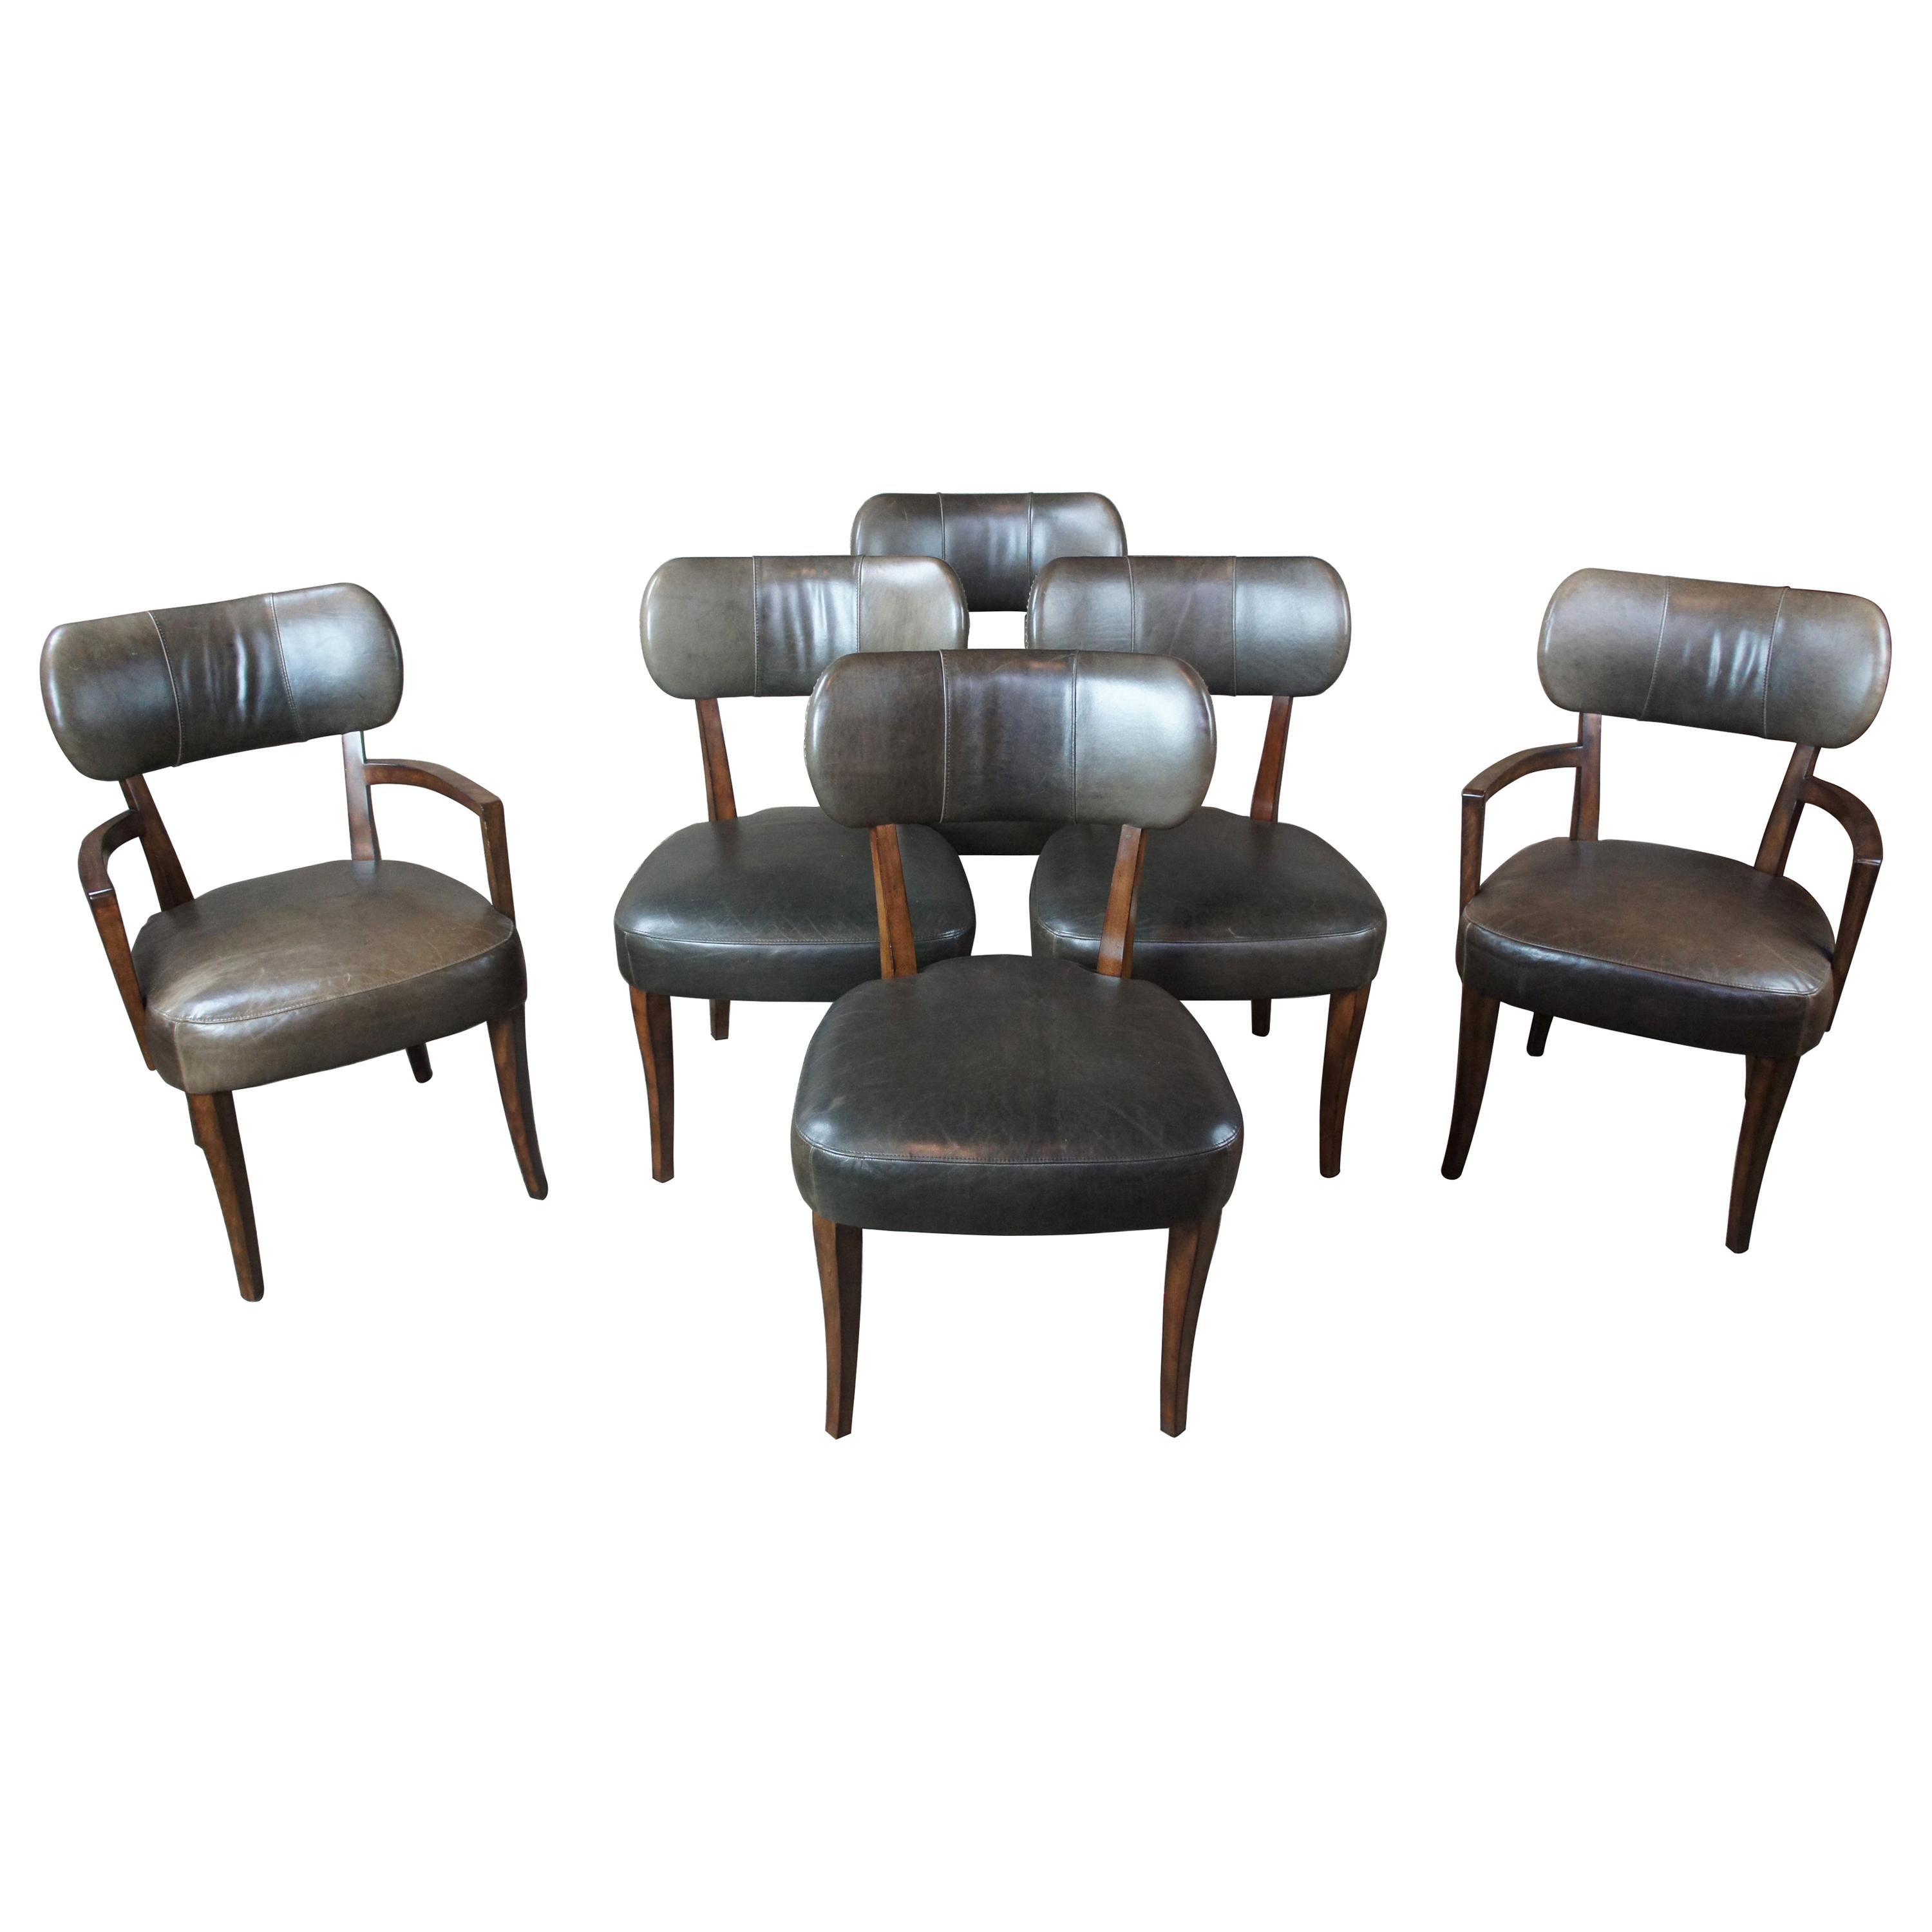 6 Traditional Henredon Acquisitions Green Leather and Mahogany Nailhead Chairs